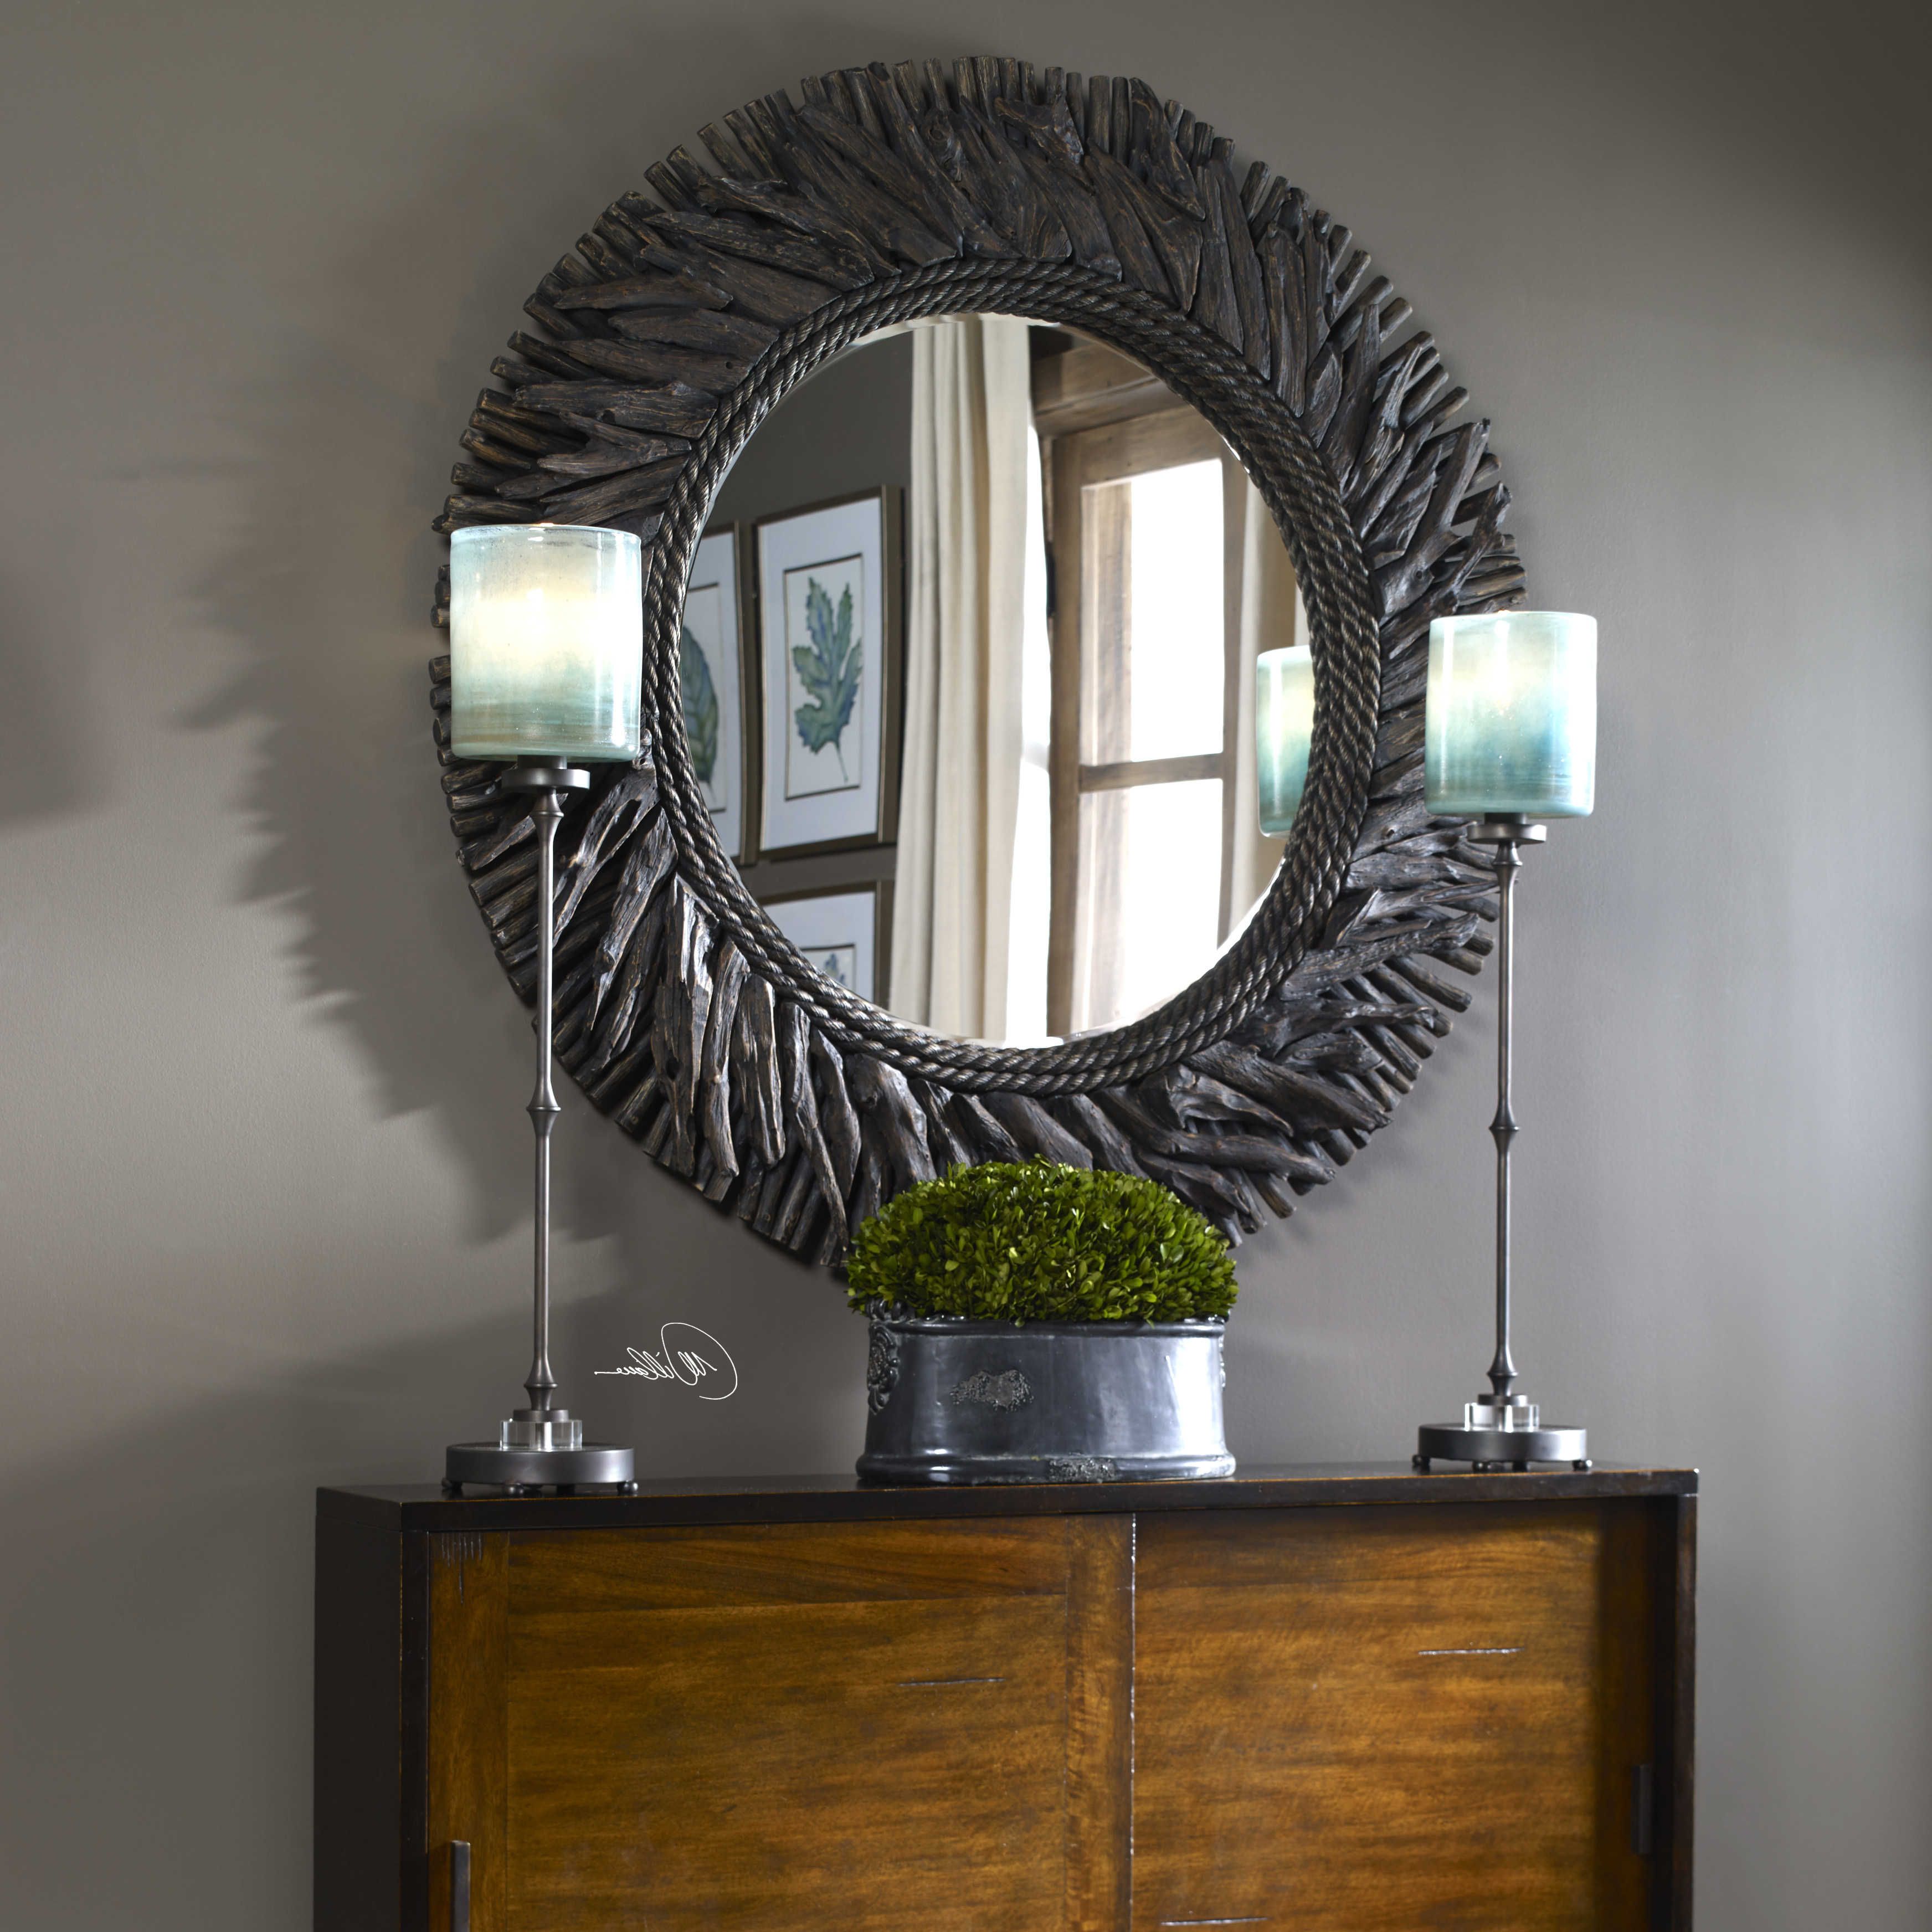 Fashionable Uttermost Wall Mirrors In Uttermost Accent Furniture, Mirrors, Wall Decor, Clocks (View 6 of 20)